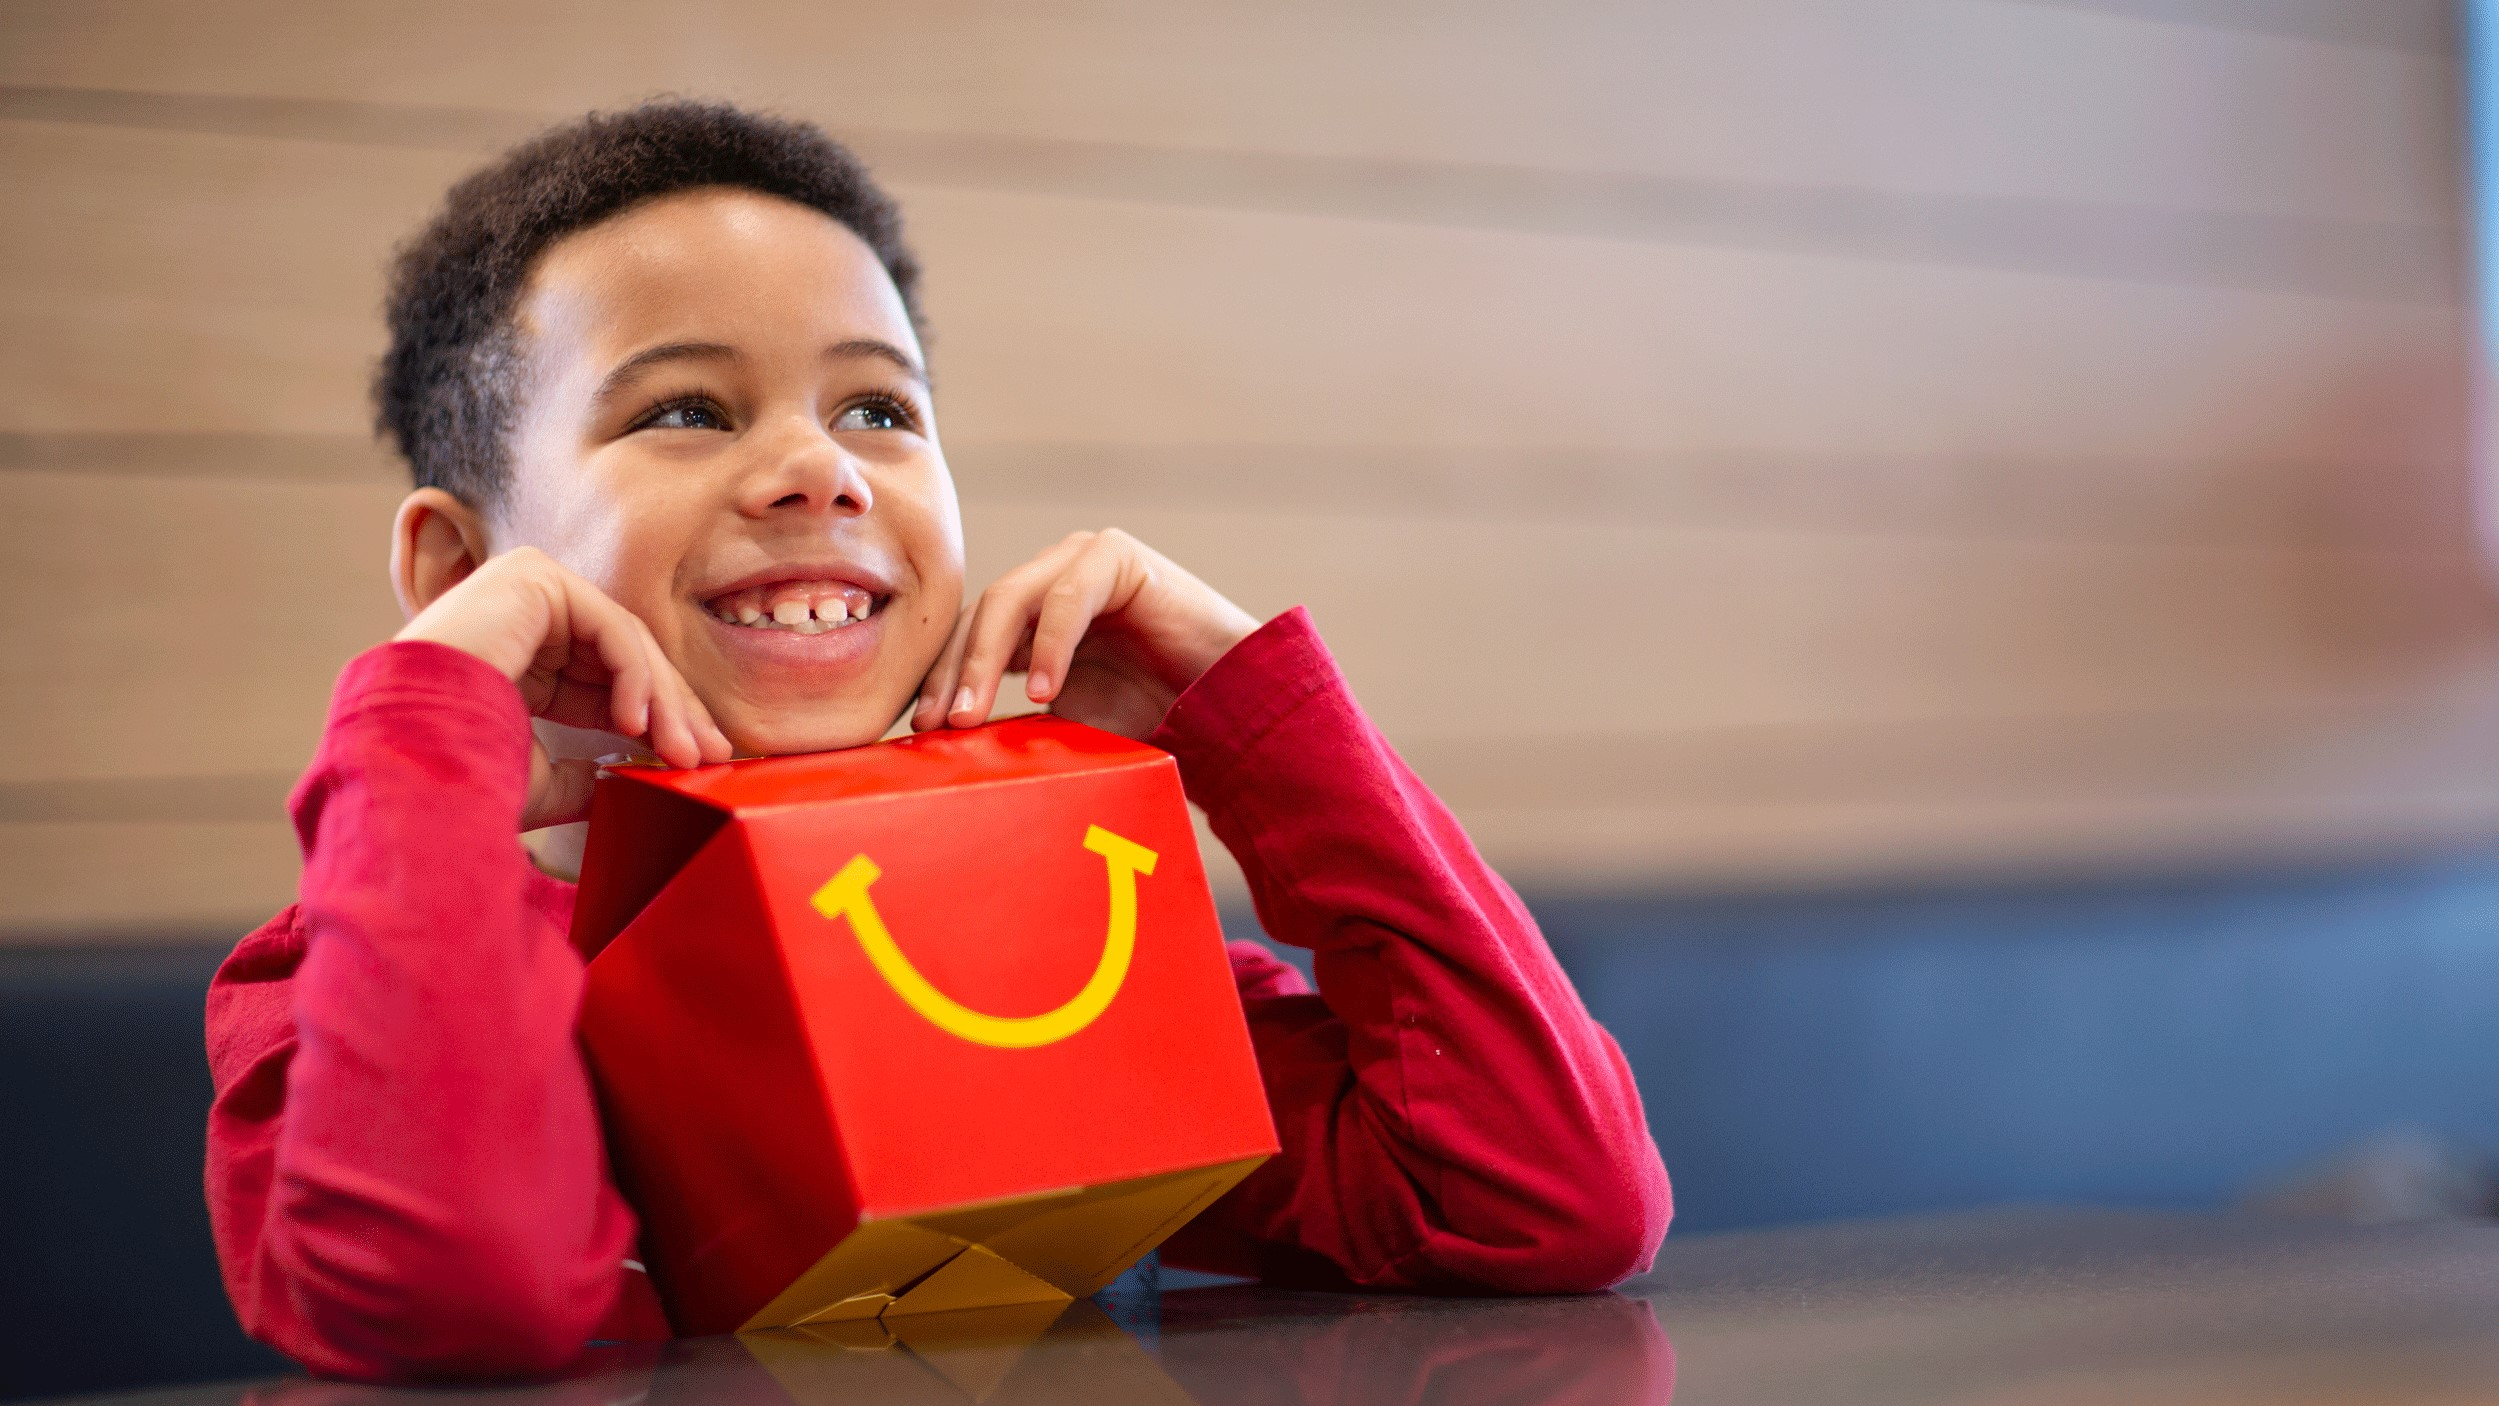 In 2022, Arcos Dorados takes a leap closer to the 100% sustainable Happy Meal toys goal